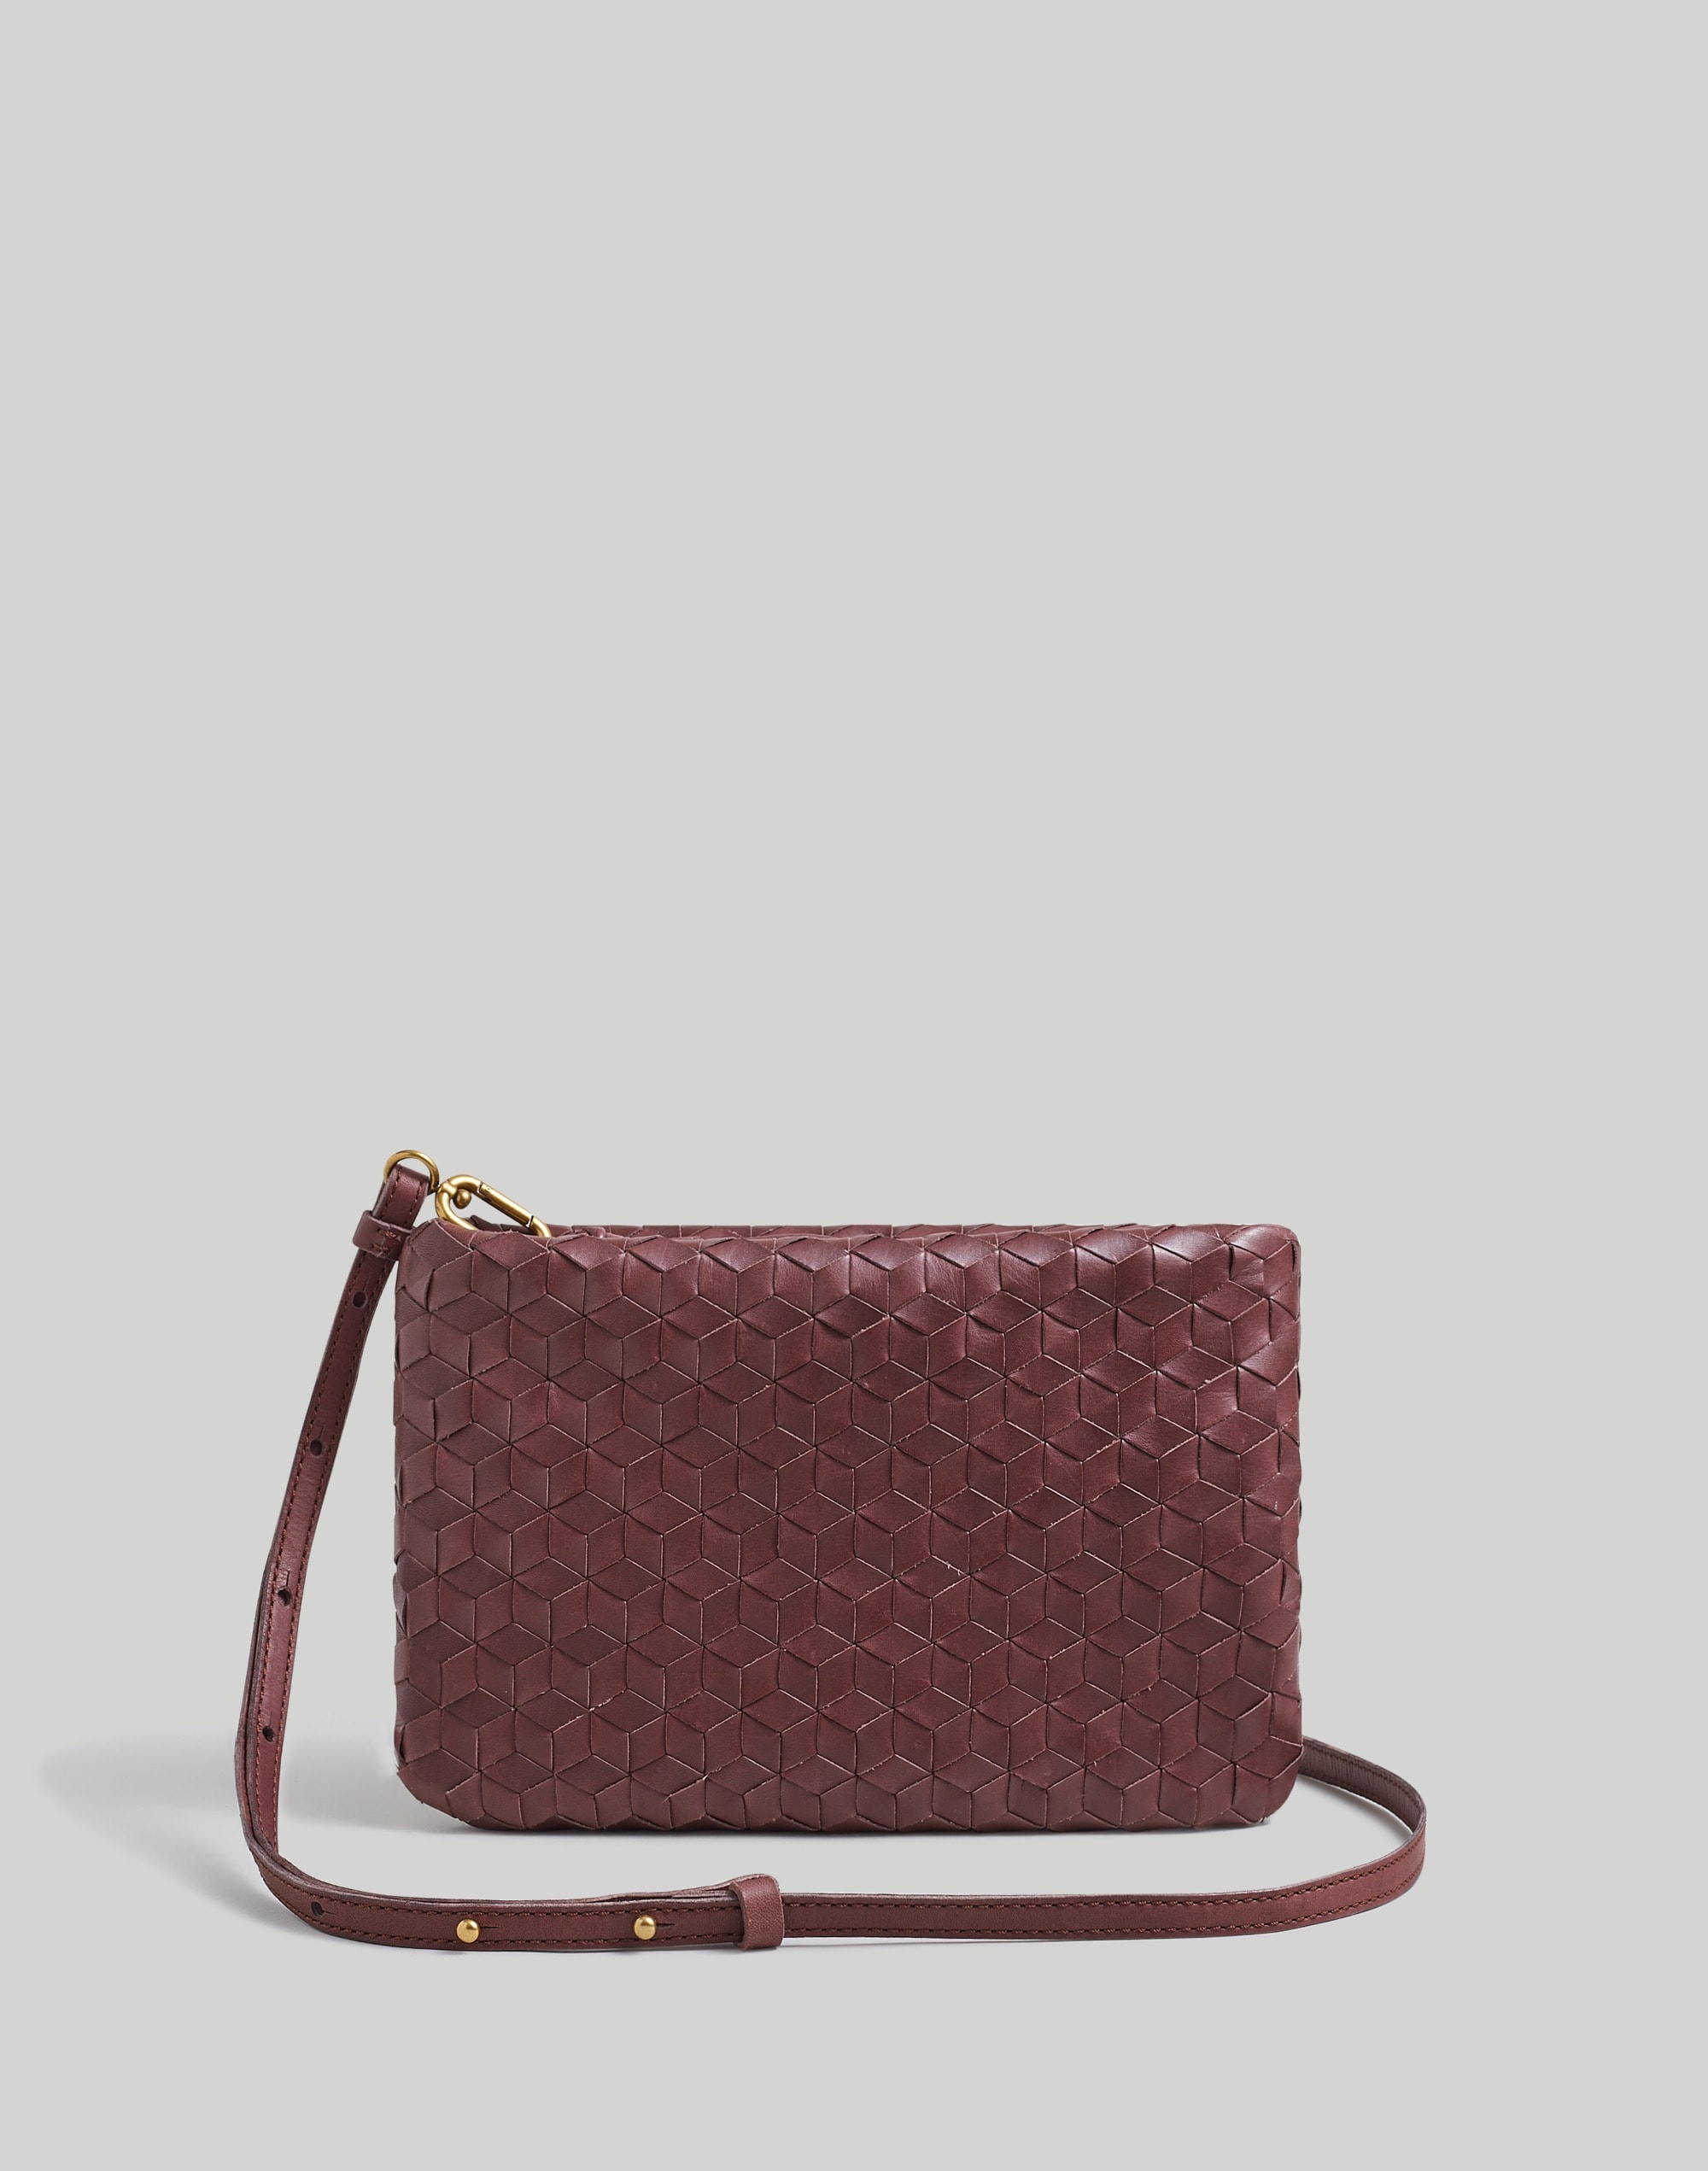 Mw The Puff Crossbody Bag: Woven Leather Edition In Chocolate Raisin